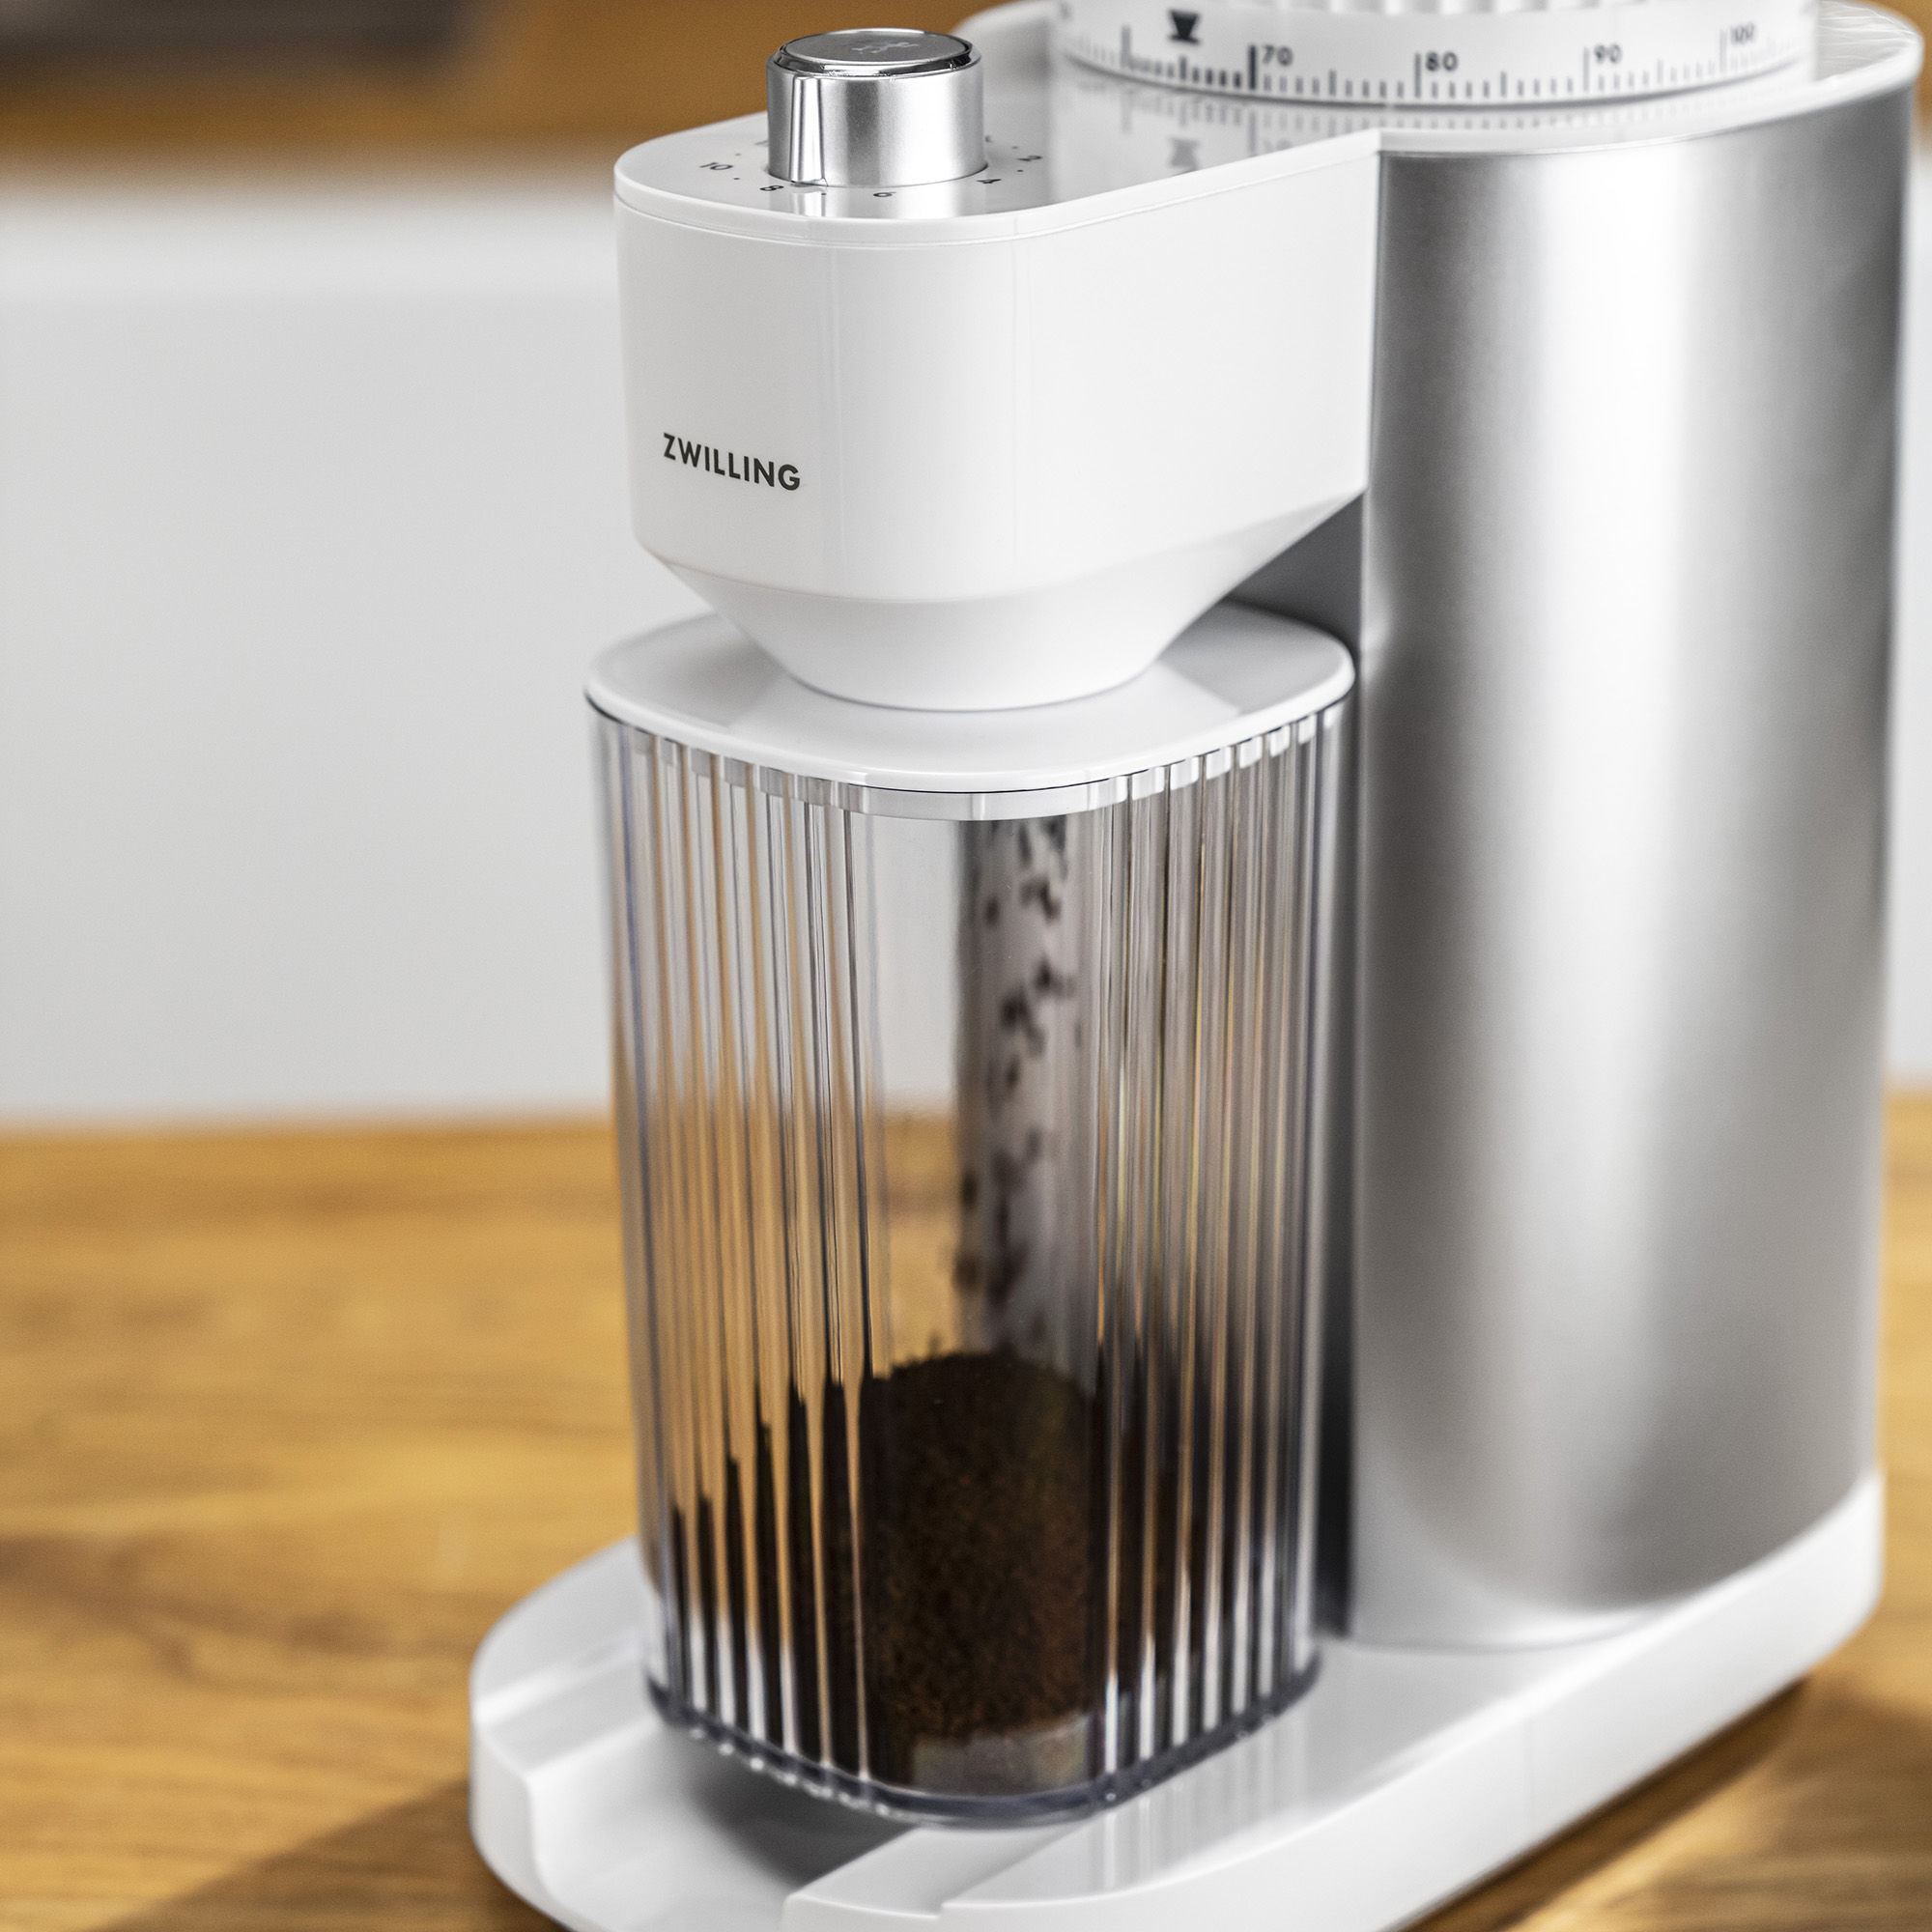 ZWILLING Enfinigy Coffee Grinder, silver